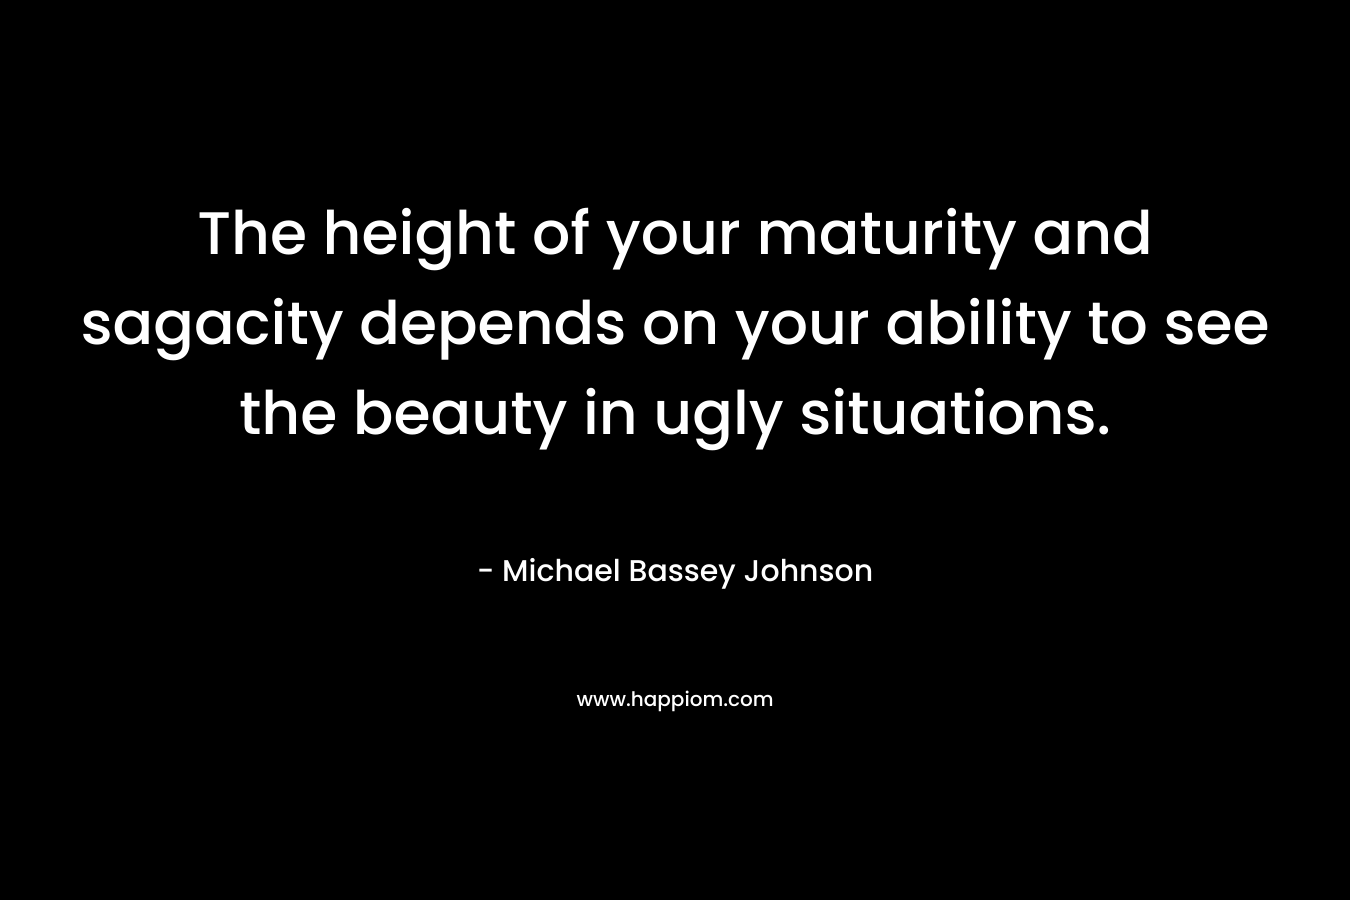 The height of your maturity and sagacity depends on your ability to see the beauty in ugly situations.